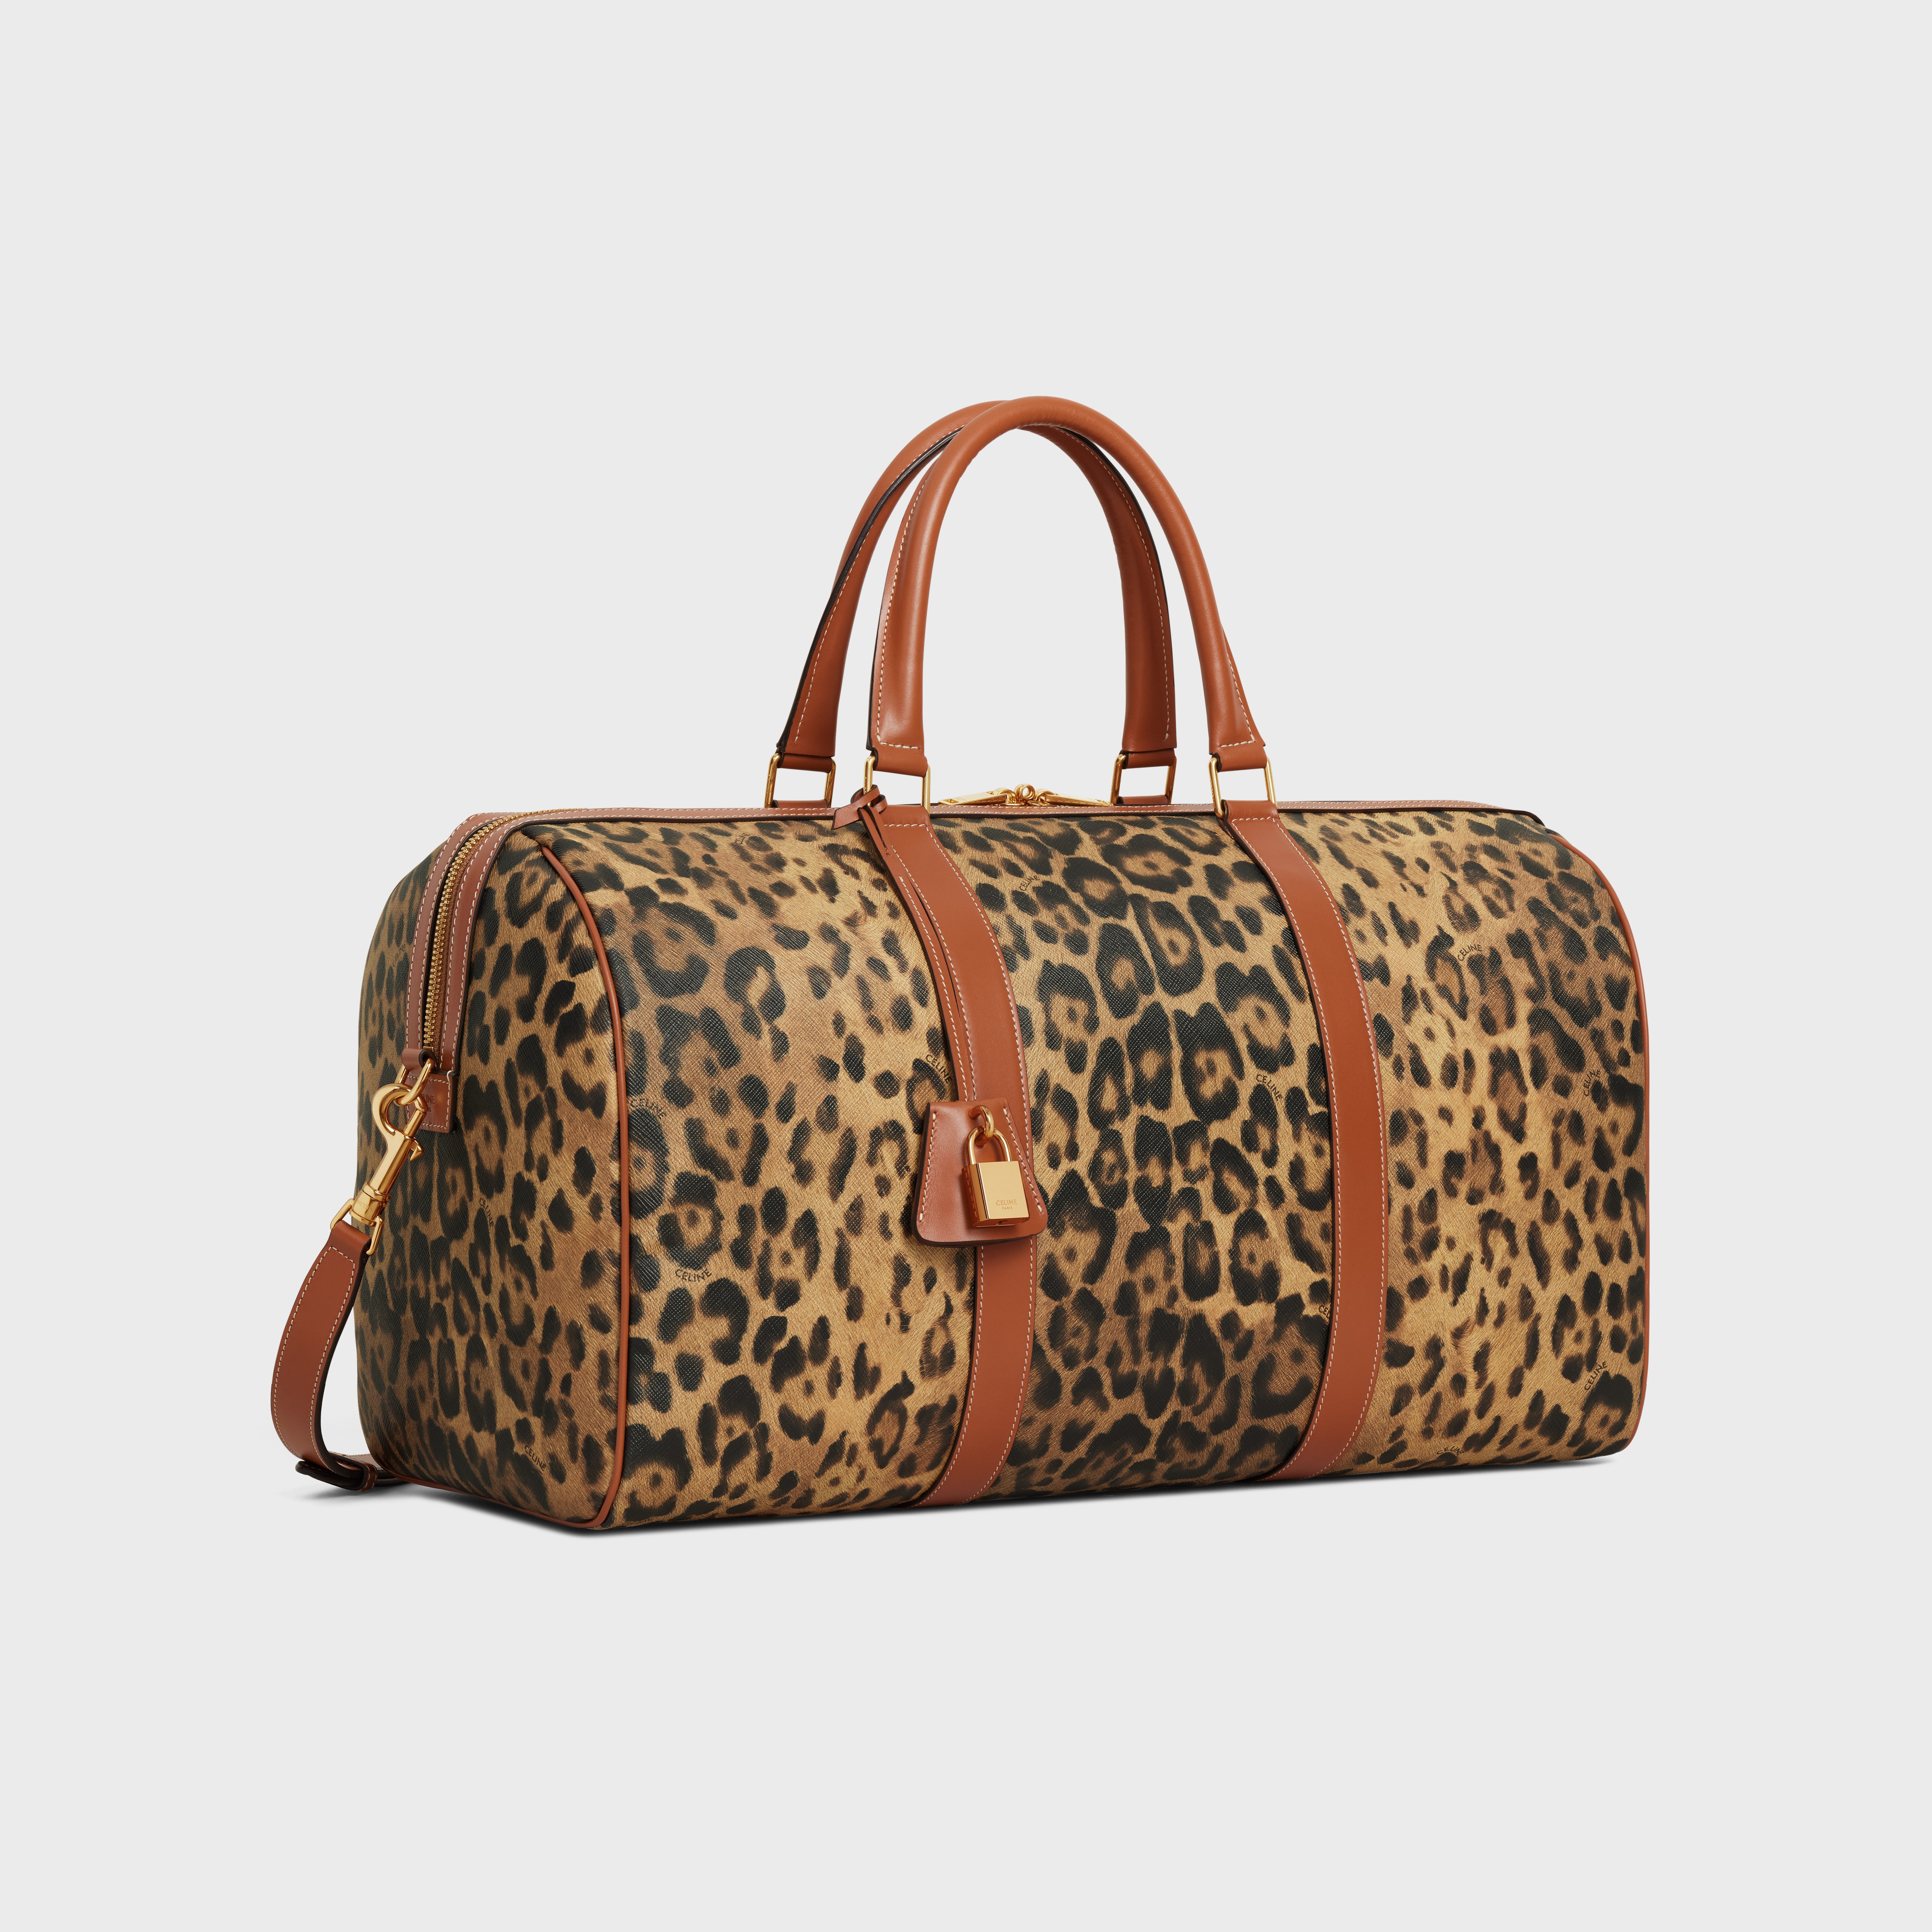 Medium Travel Bag in Celine canvas with leopard print - 2